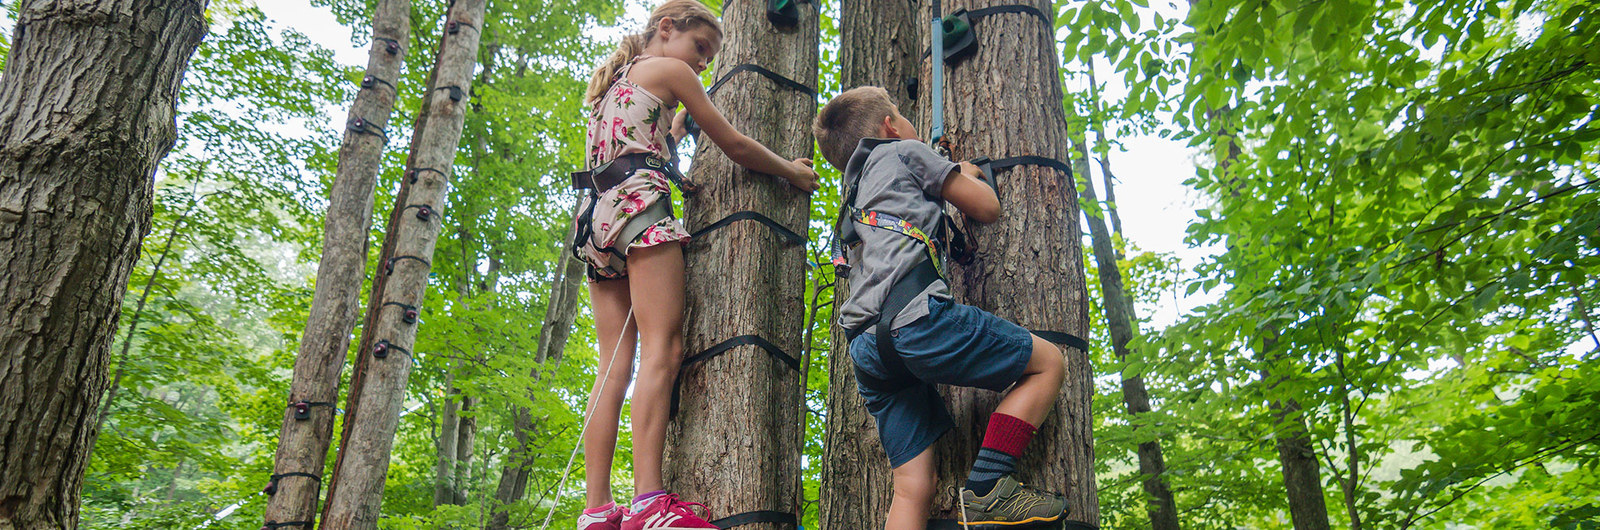 Children wearing harness climb trees in the forest